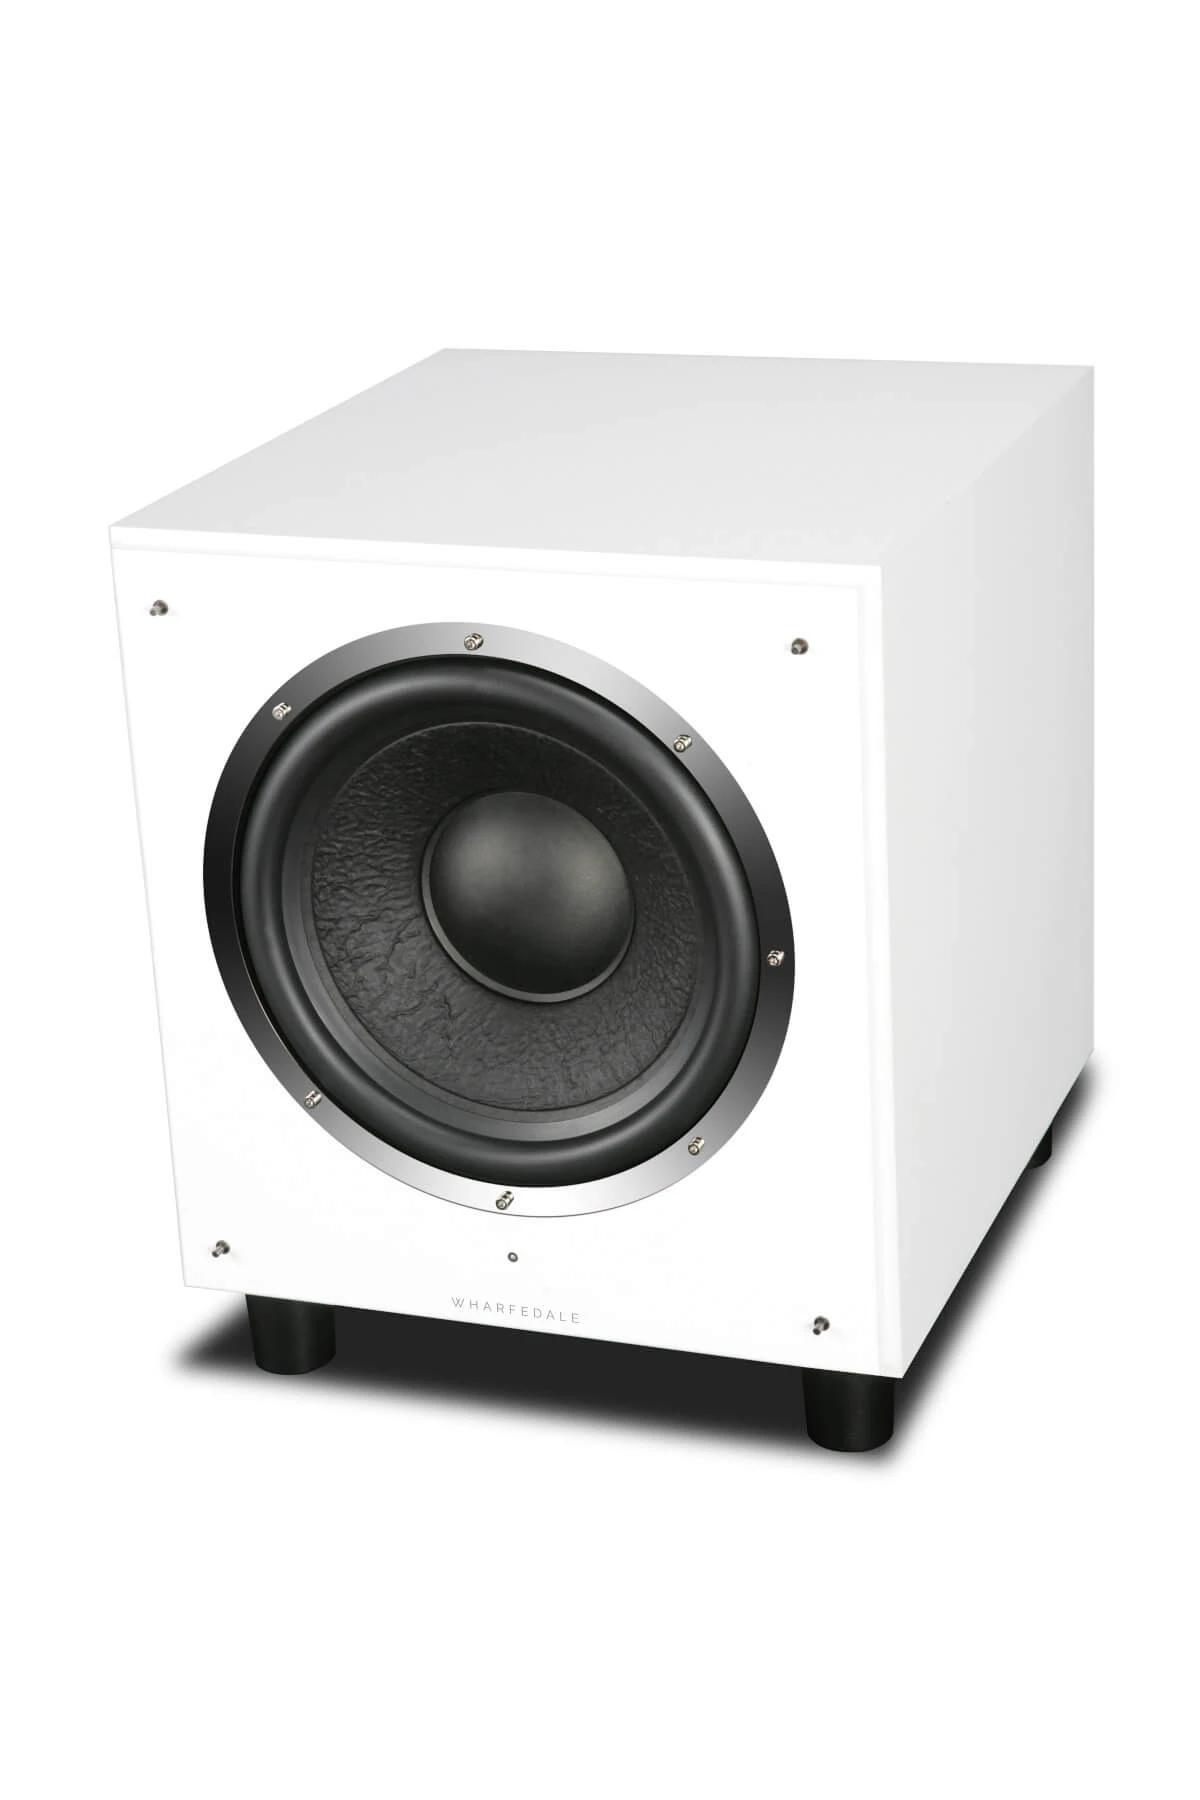 Wharfedale-SW-10-white-sandex-side-front